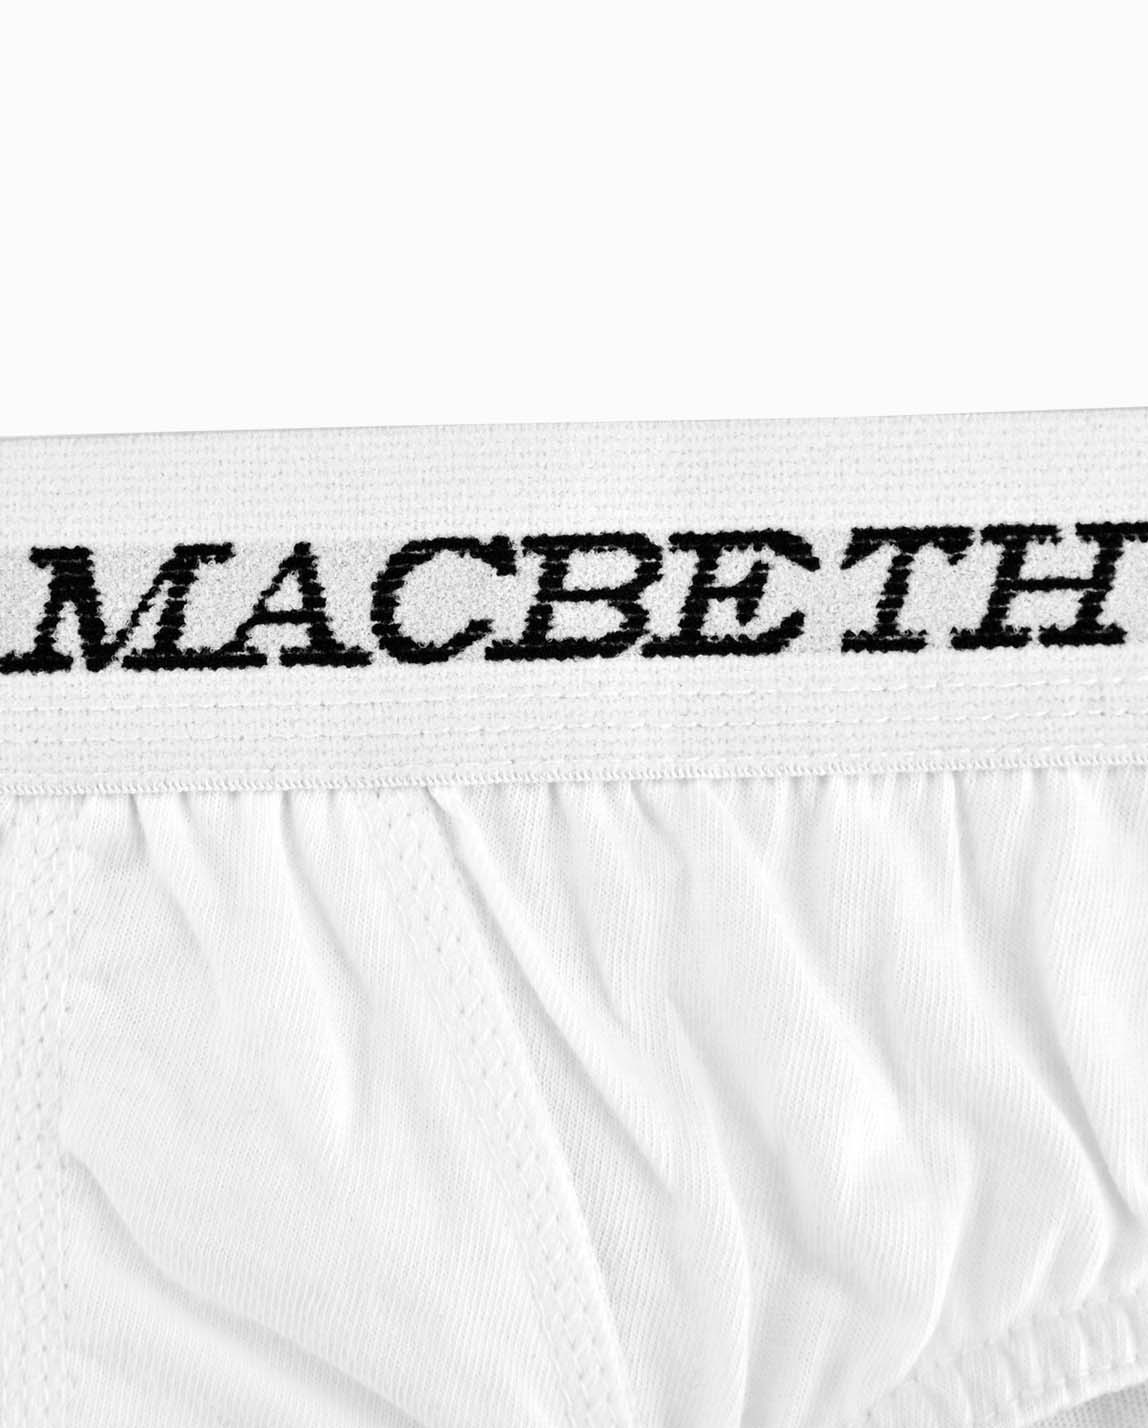 Picture of HIPSTER BRIEF -M2PH31B 3 IN 1 BRIEF